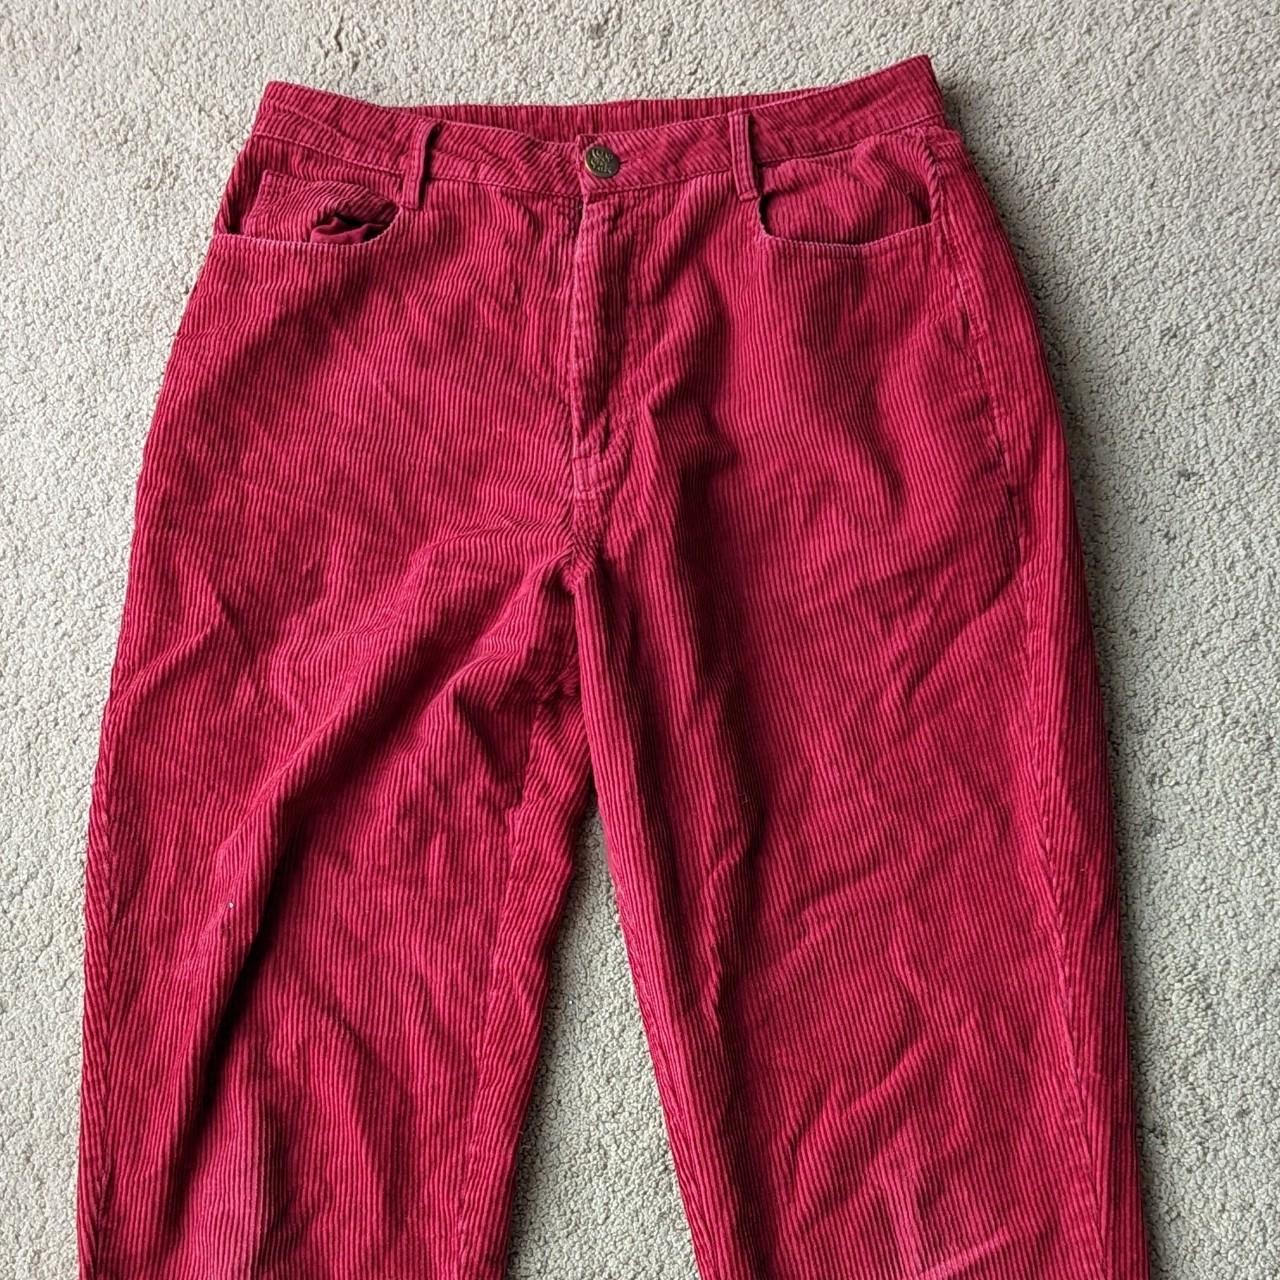 Lucy and yak Dana corduroy trousers (old... - Depop